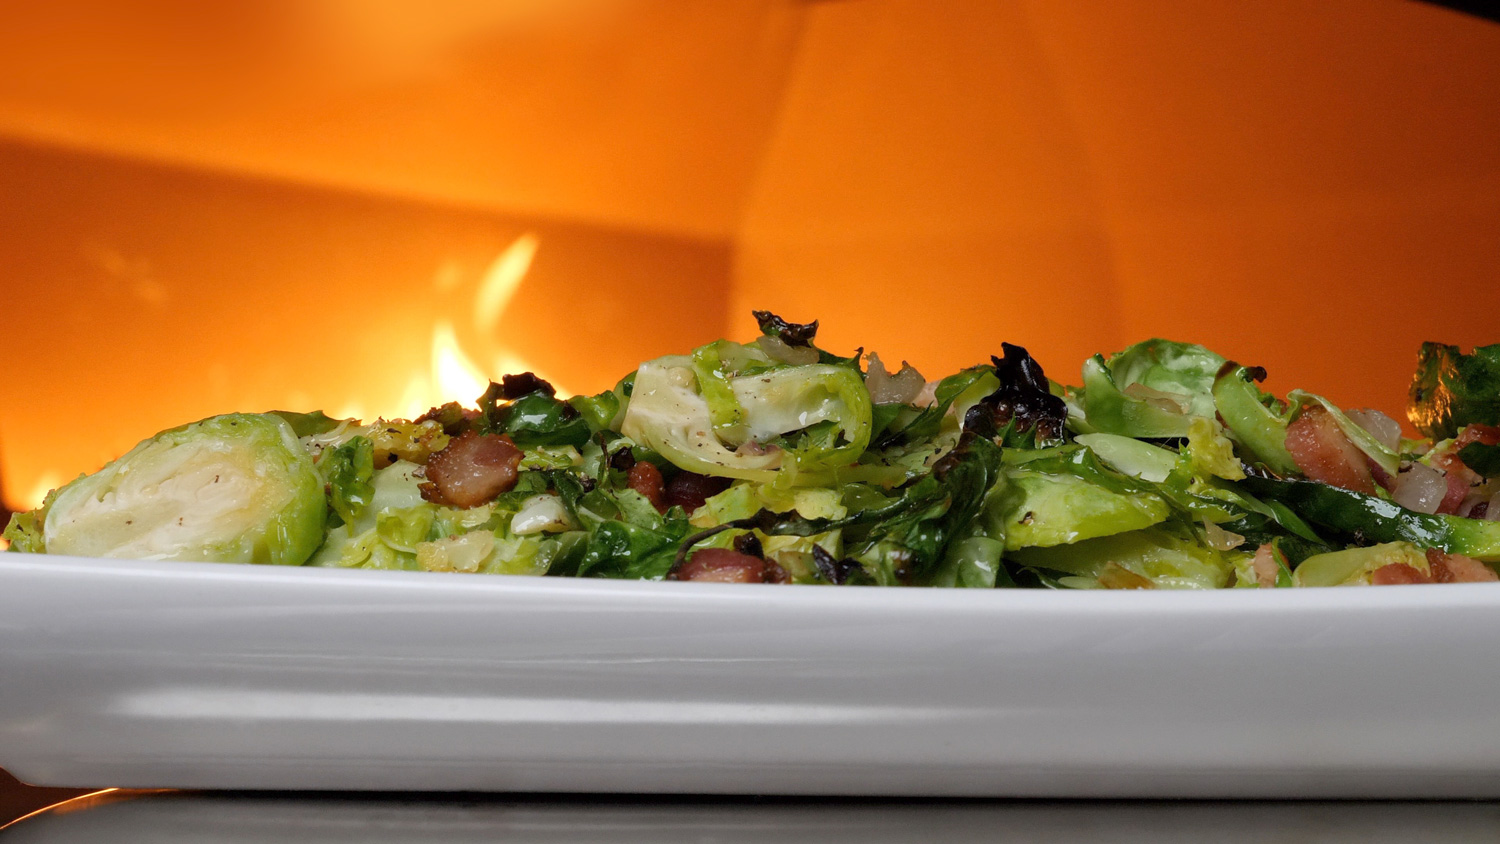 Brussels Sprouts dish with flame in the background